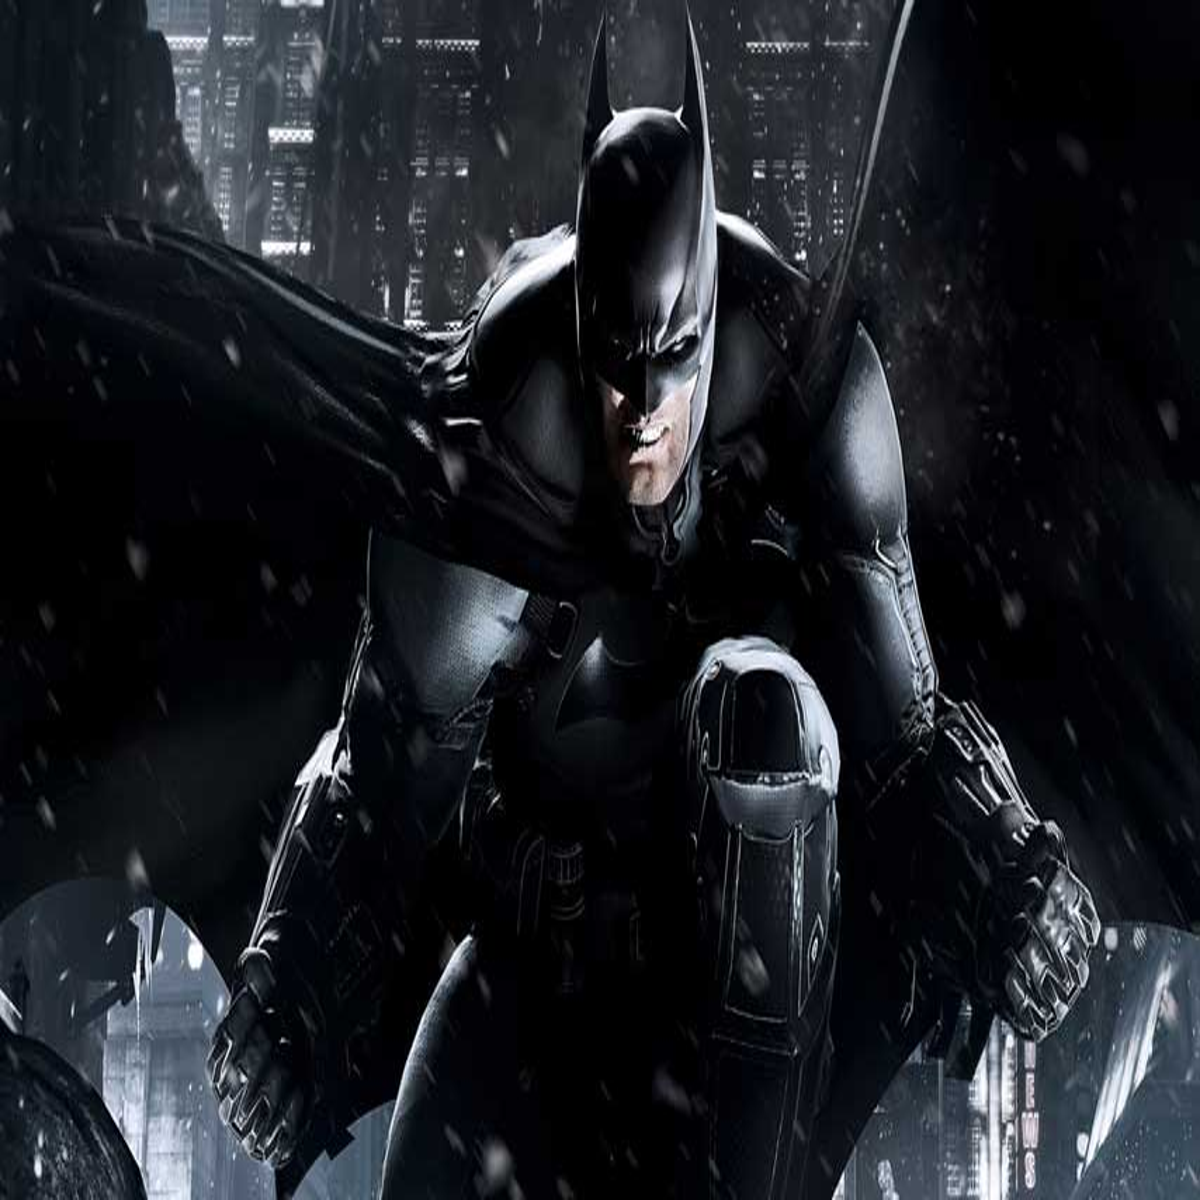 Warner Bros. is discontinuing Batman: Arkham Origins online services,  reminding everyone the game had multiplayer